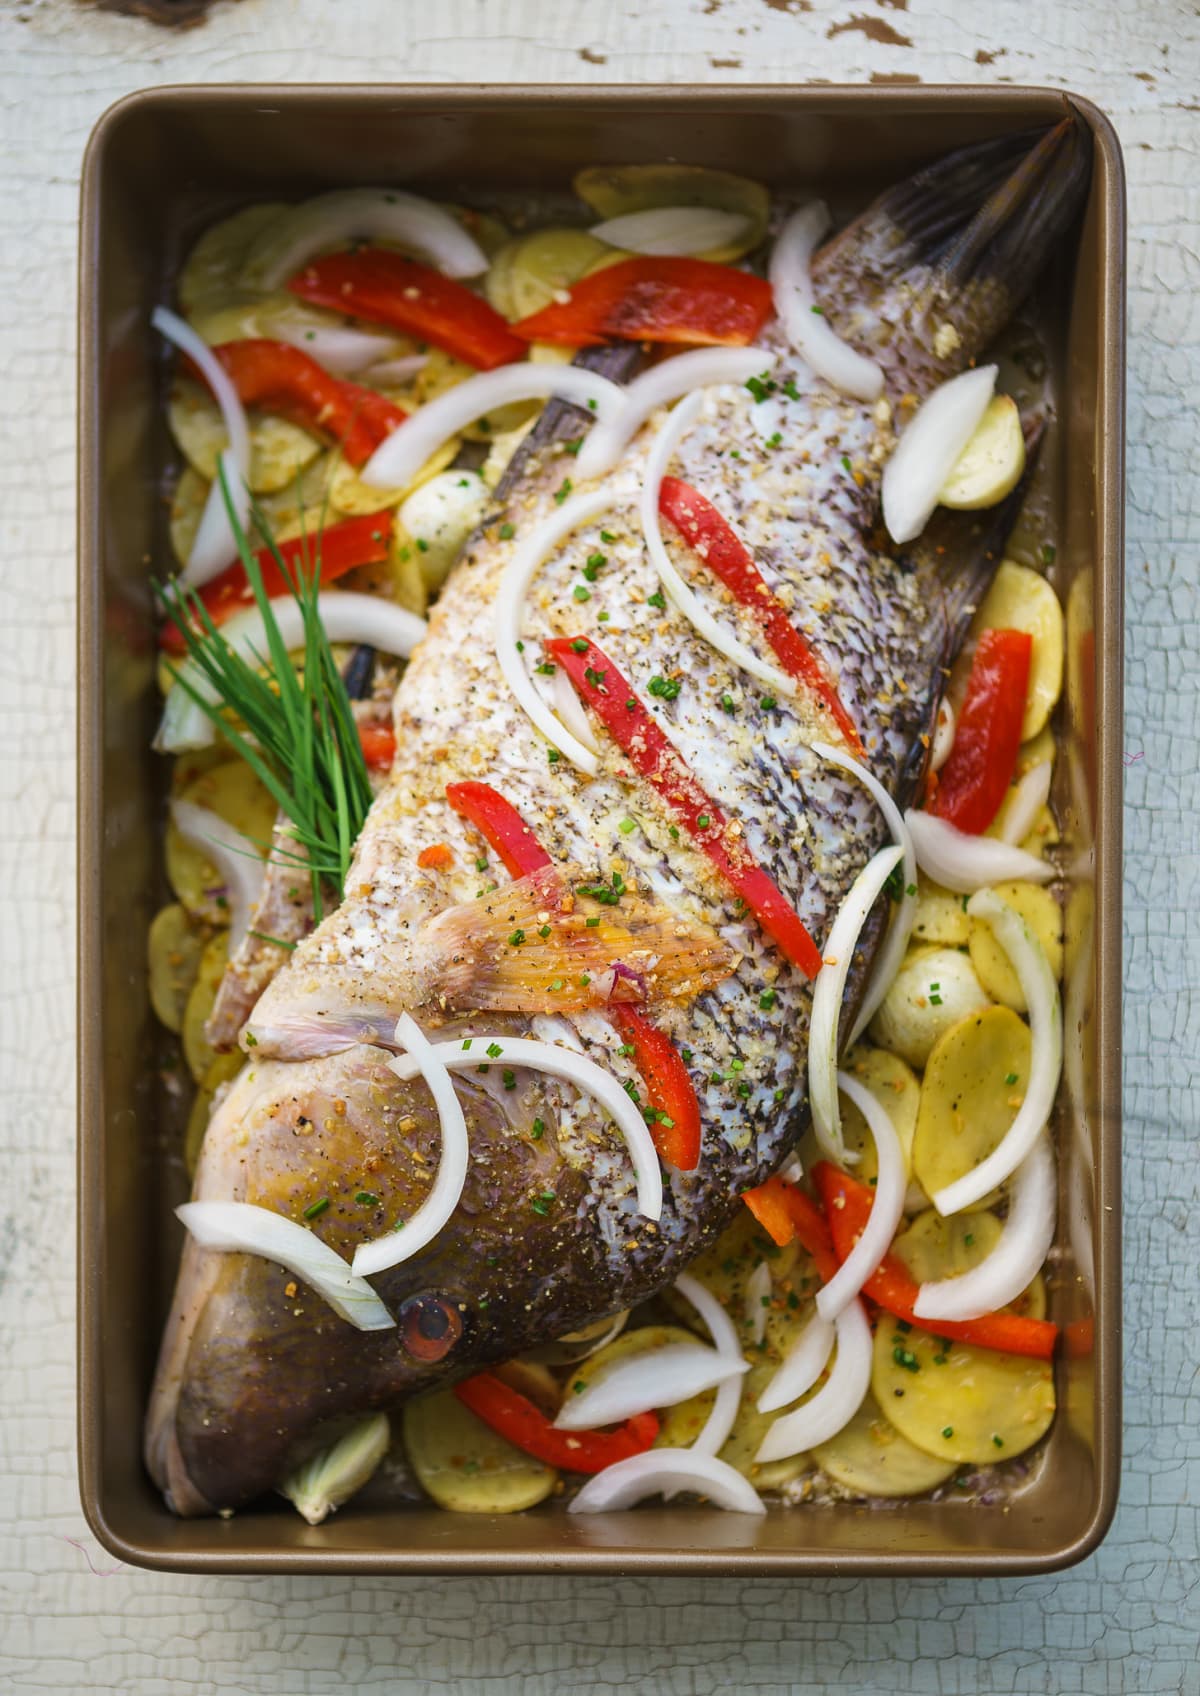 Whole hogfish in a pan with vegetables and fruits